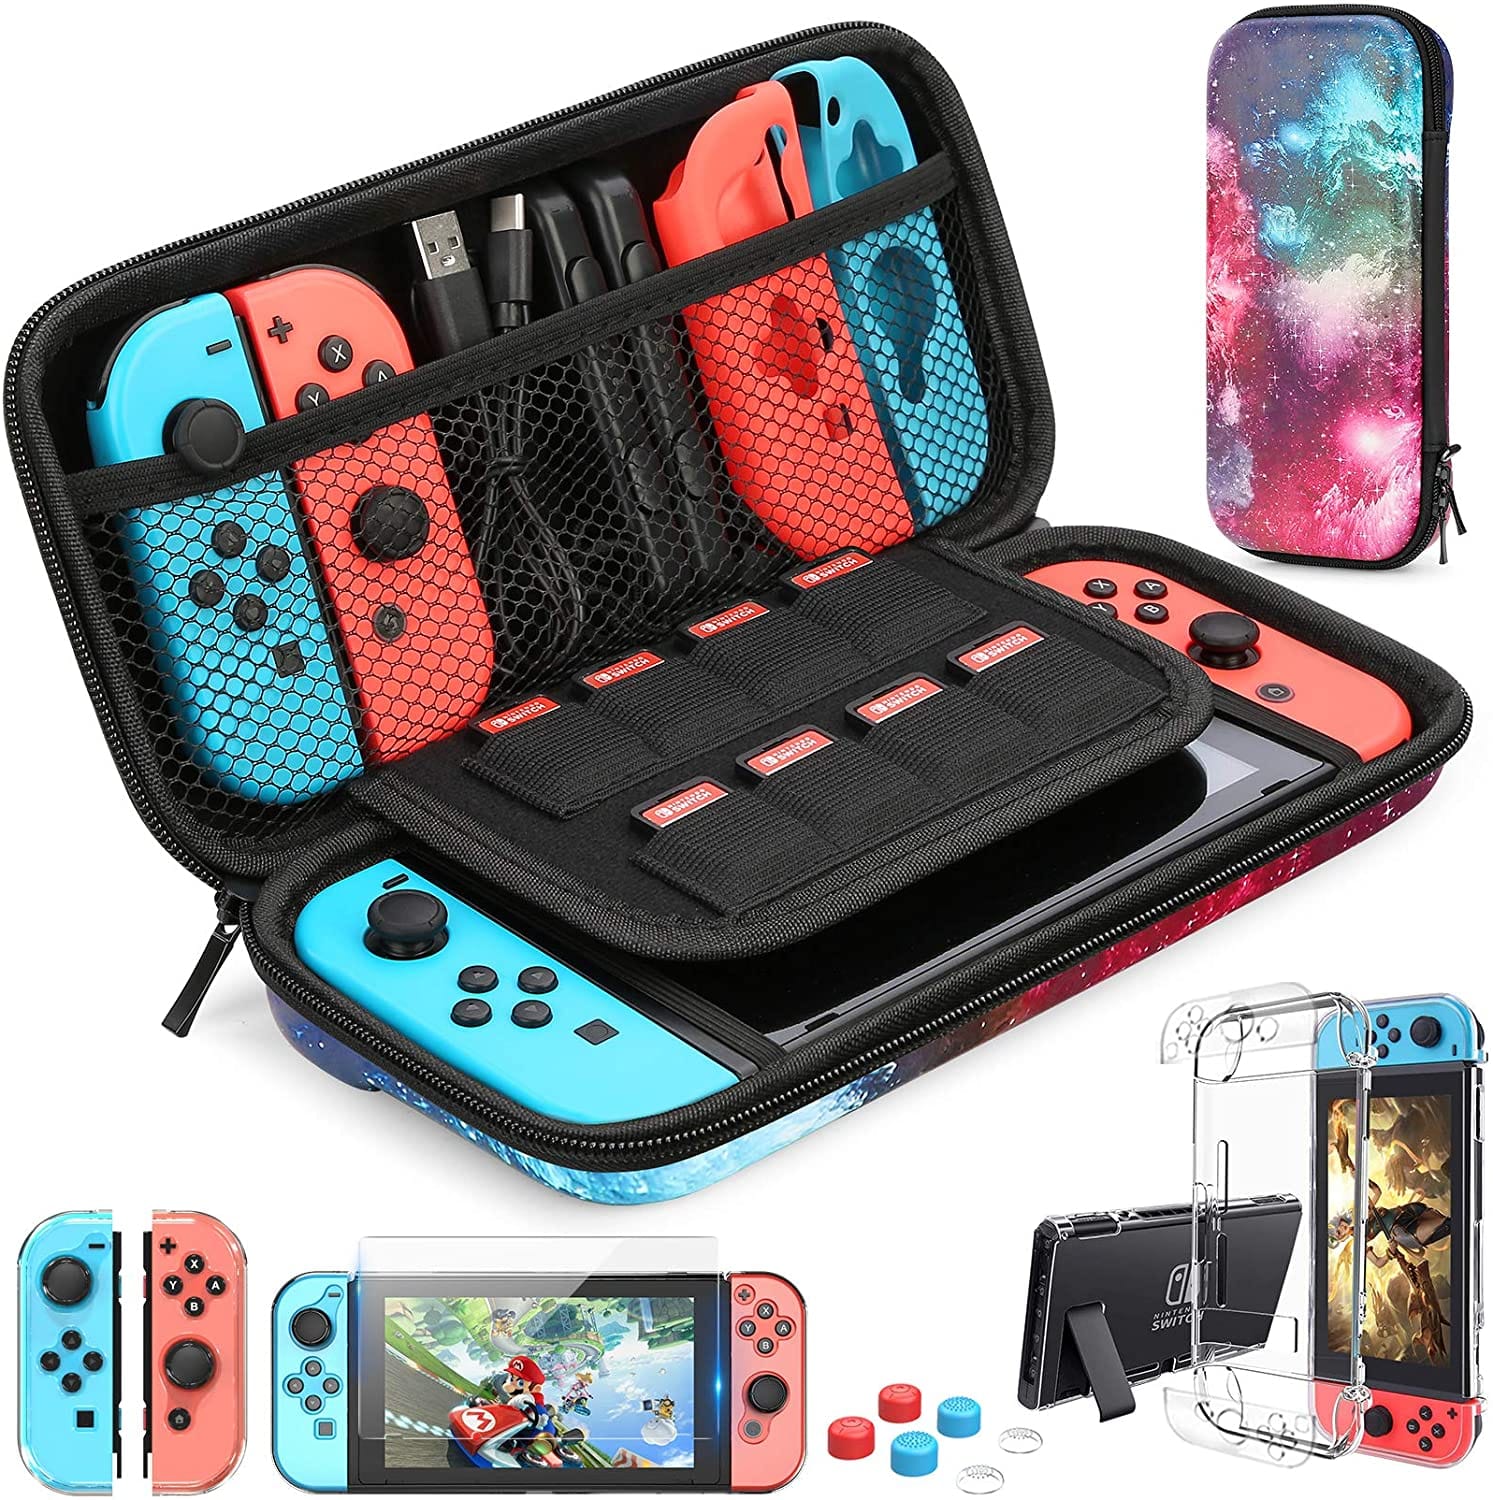 Nintendo Switch Case Carrying Bag  with  9 in 1 Nintendo Switch Accessories Kit and 6 Pcs Thumb Grip